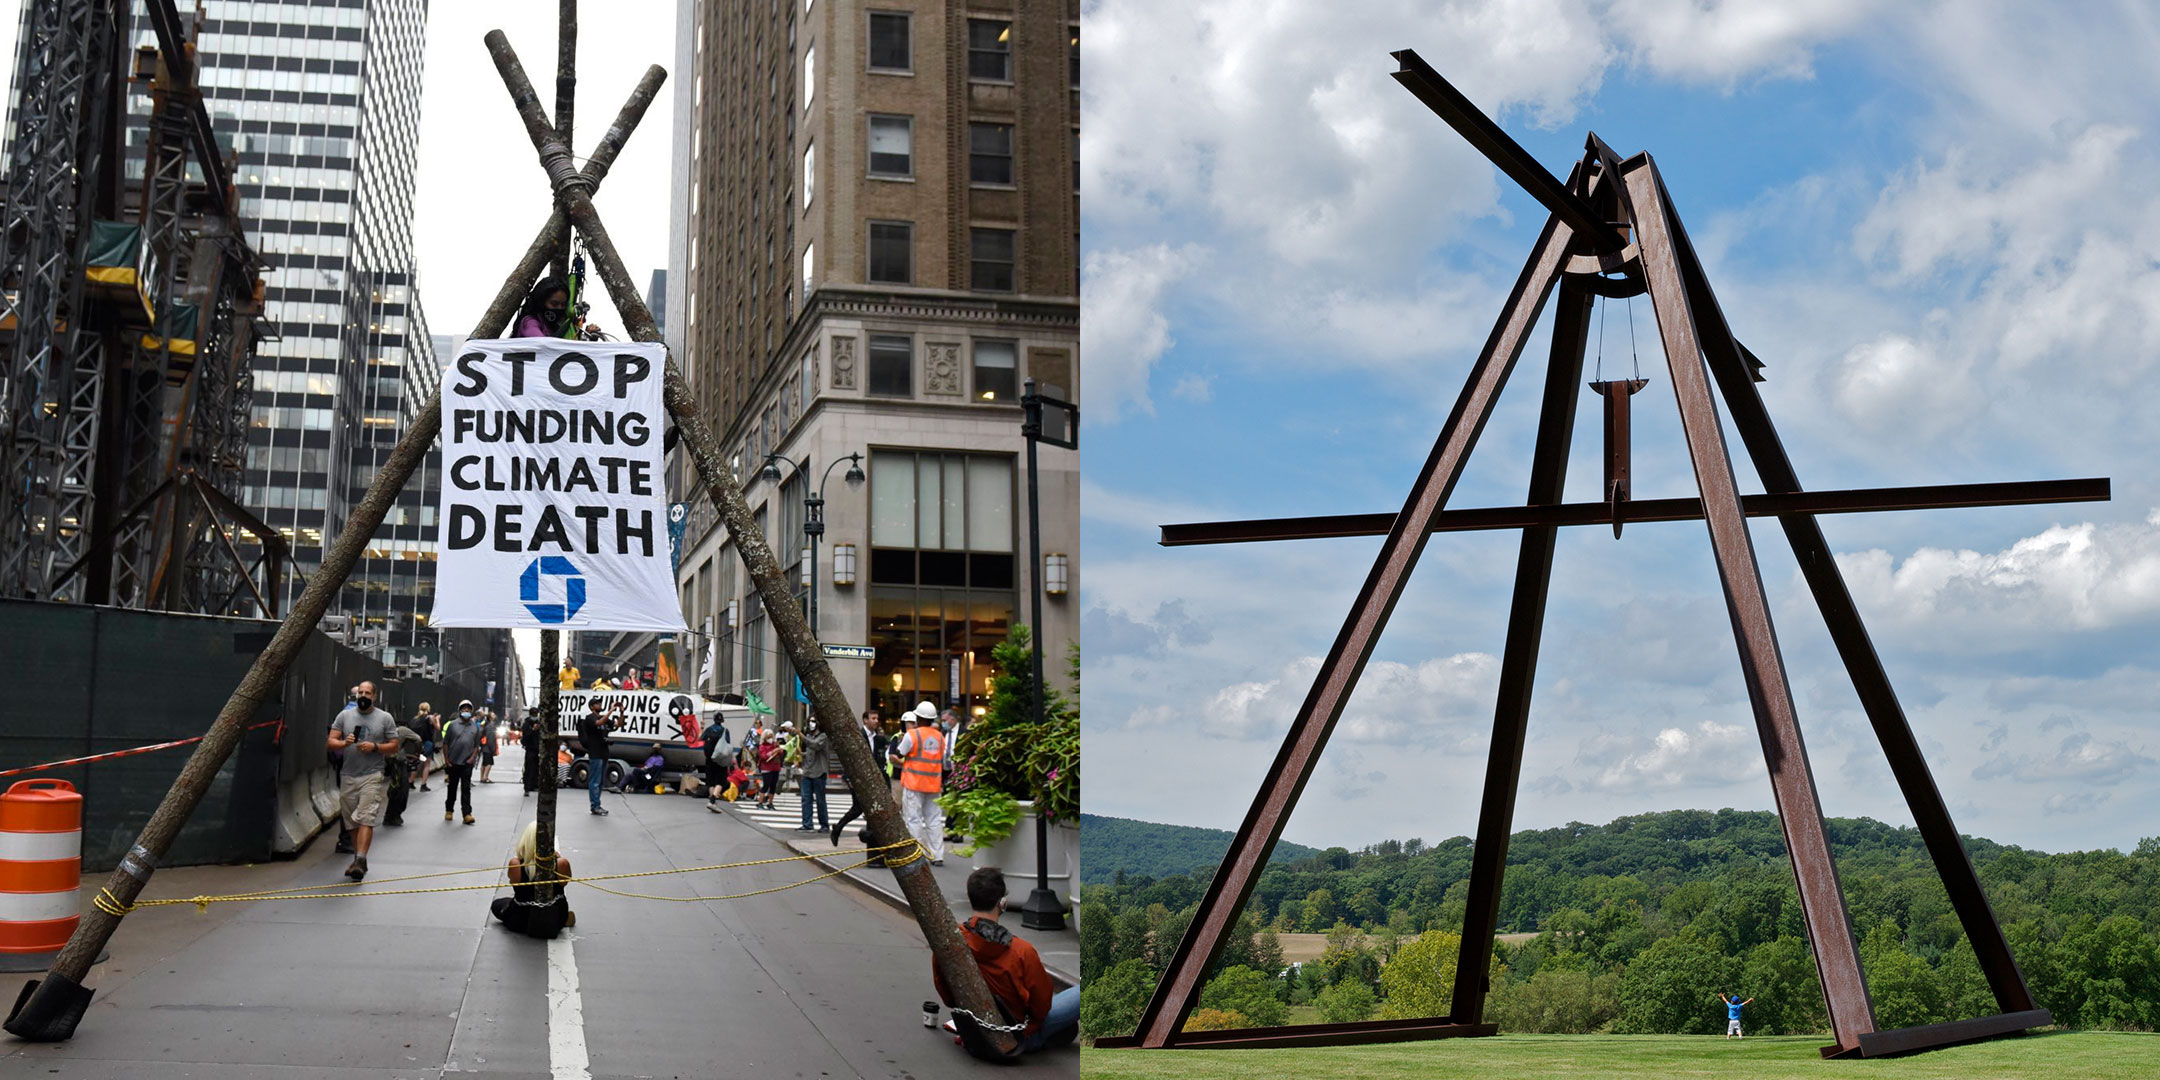 Left: Extinction Rebellion (XR)  wood pyramid frame structure blocade  with protesters chained to each leg of the structure as a protest on Wall Street Sept 17, 2011. Right: Giant metal sculpture "Pyramidion"by artist Mark Di Suvero, installed in a in a green field. The pyramid shape of which is mimmicked by the XR blocade structure on the left.